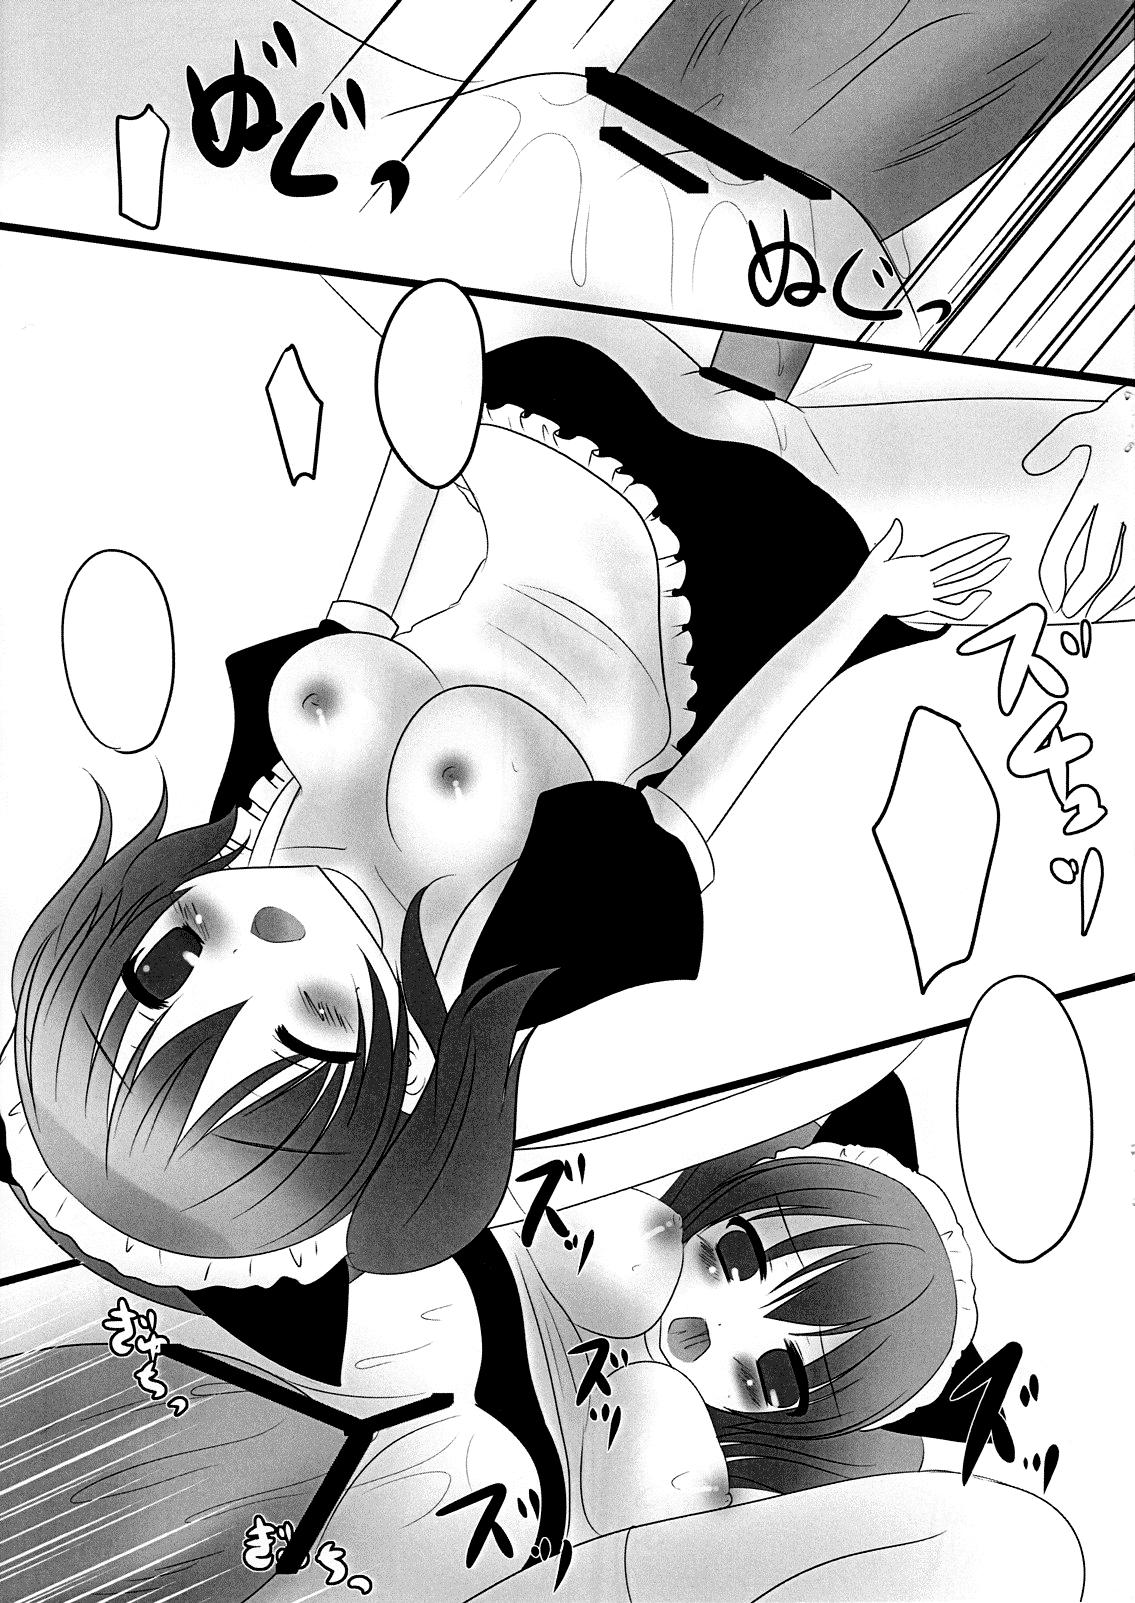 Ameture Porn Sweets Paradise - Inu x boku ss Shecock - Page 8